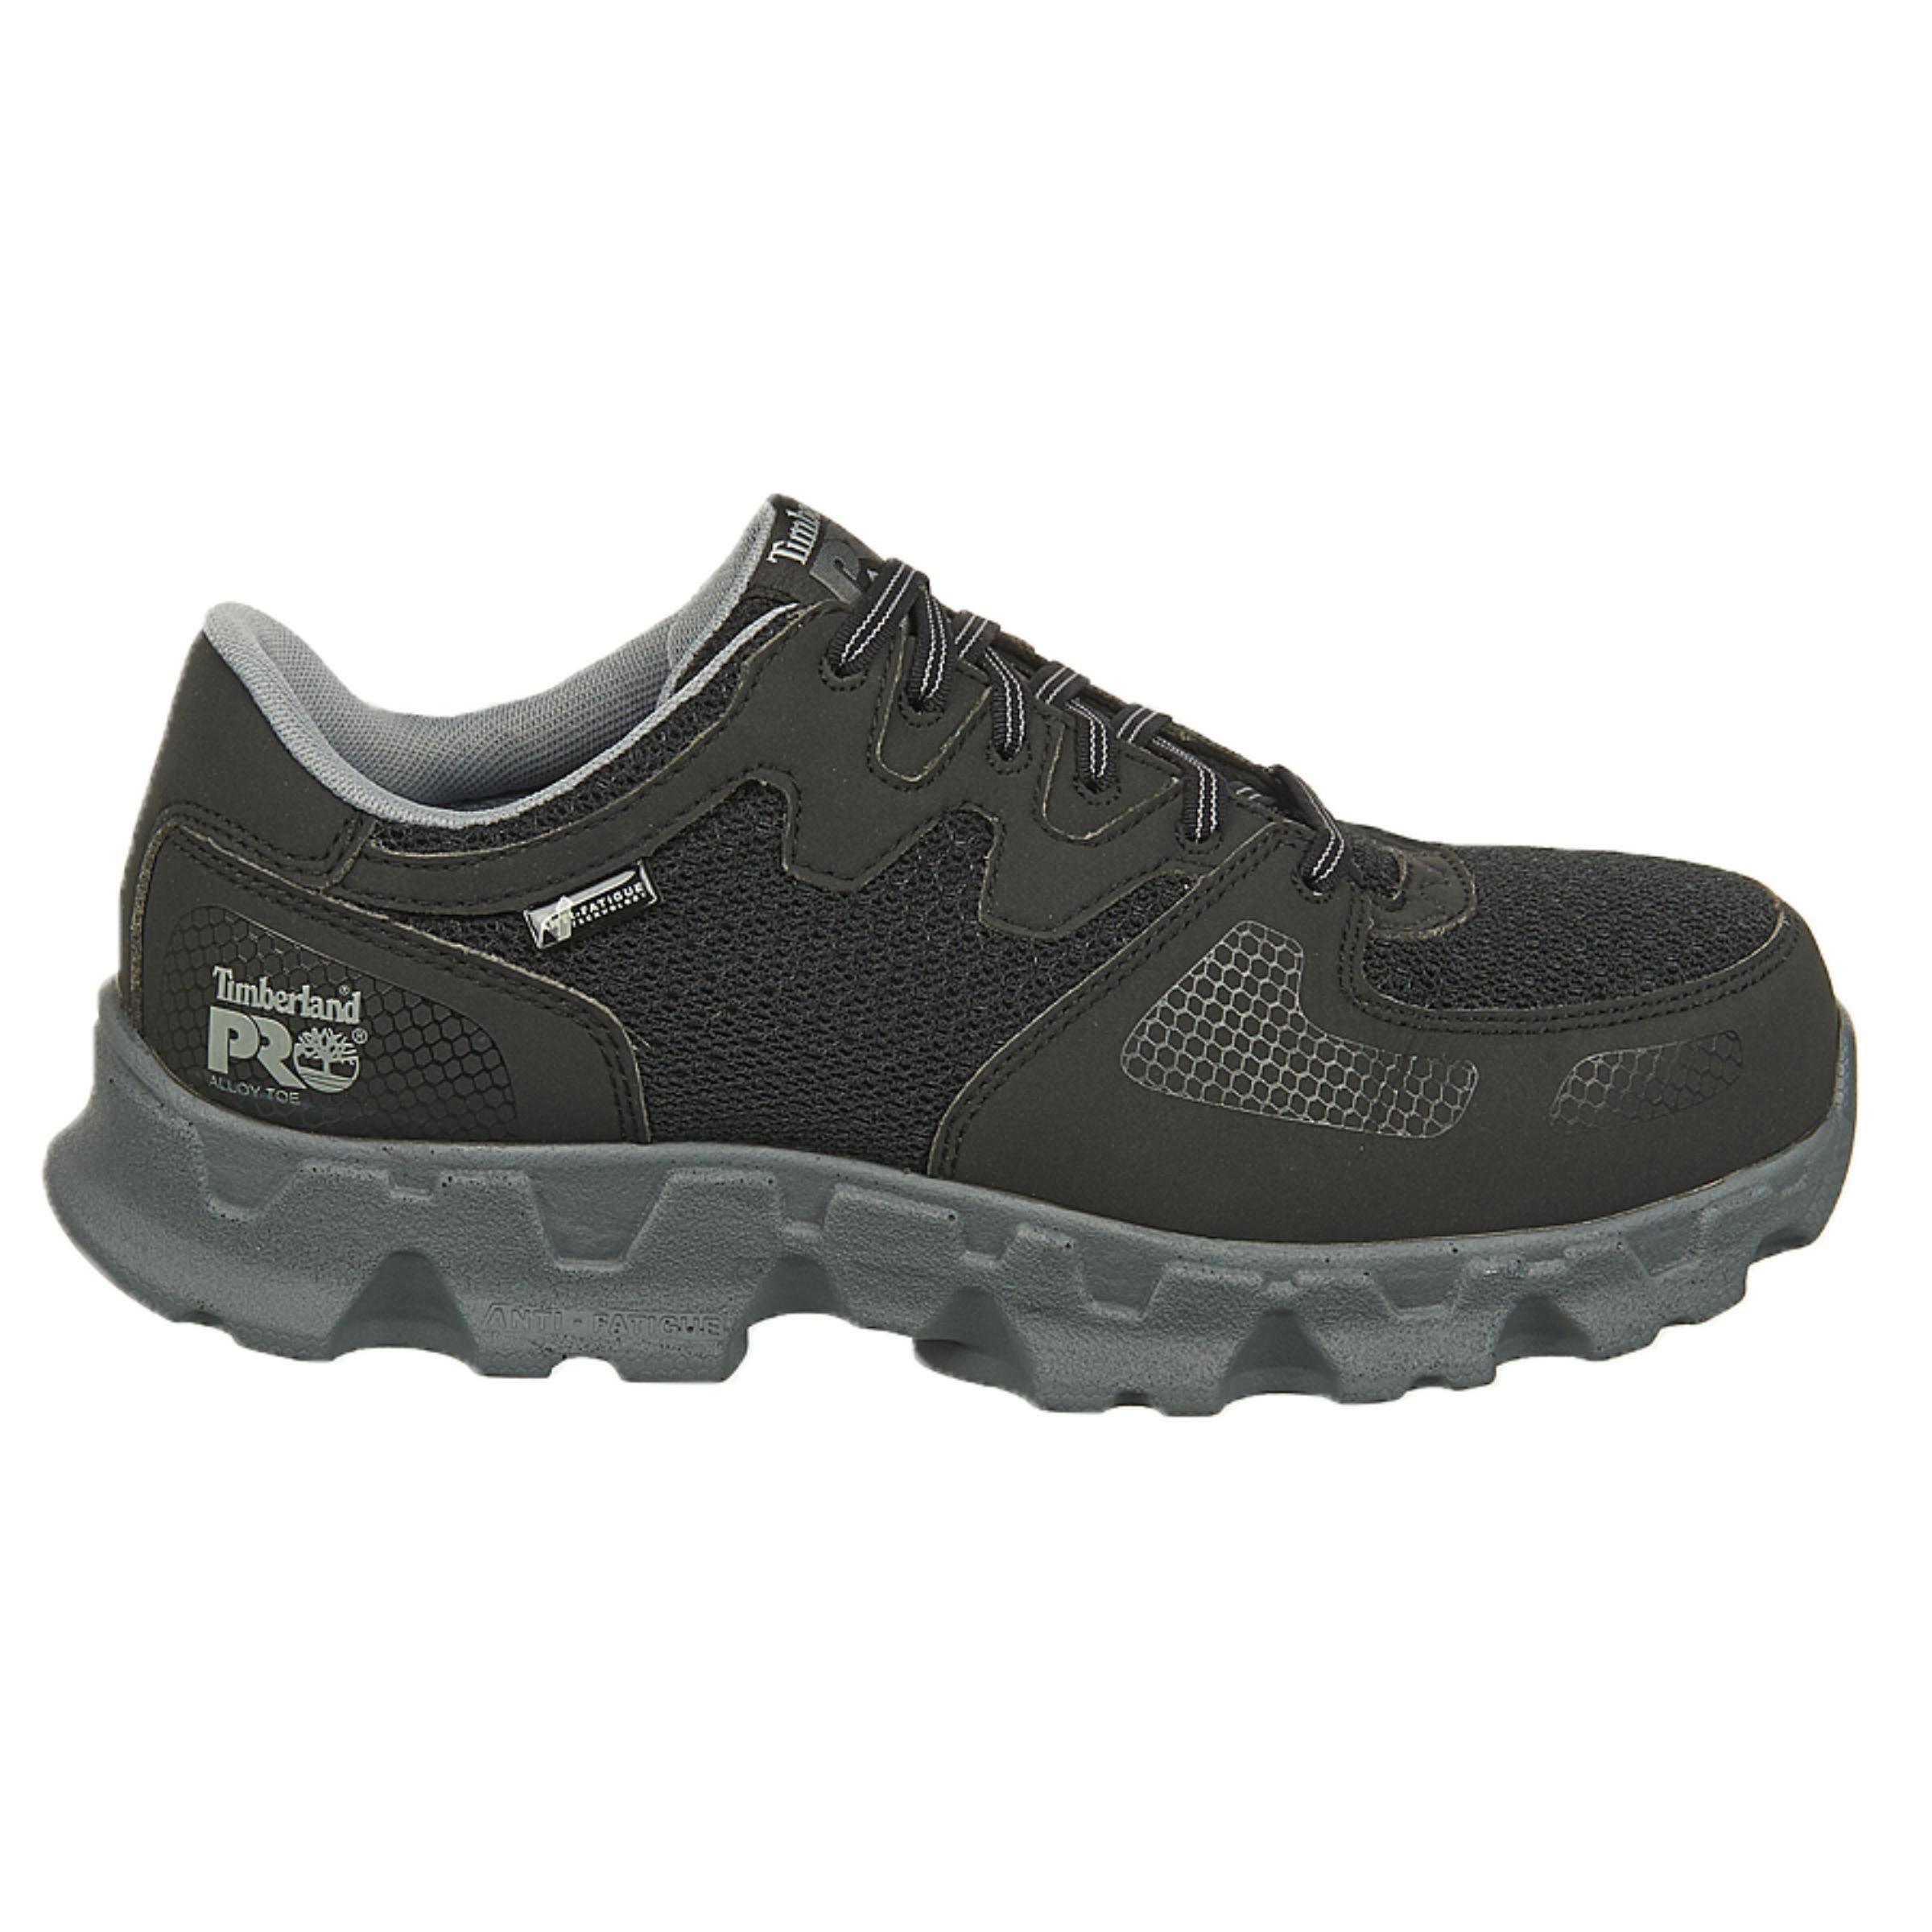 Timberland Leather Powertrain Medium/wide Alloy Safety Toe Work Shoes ...